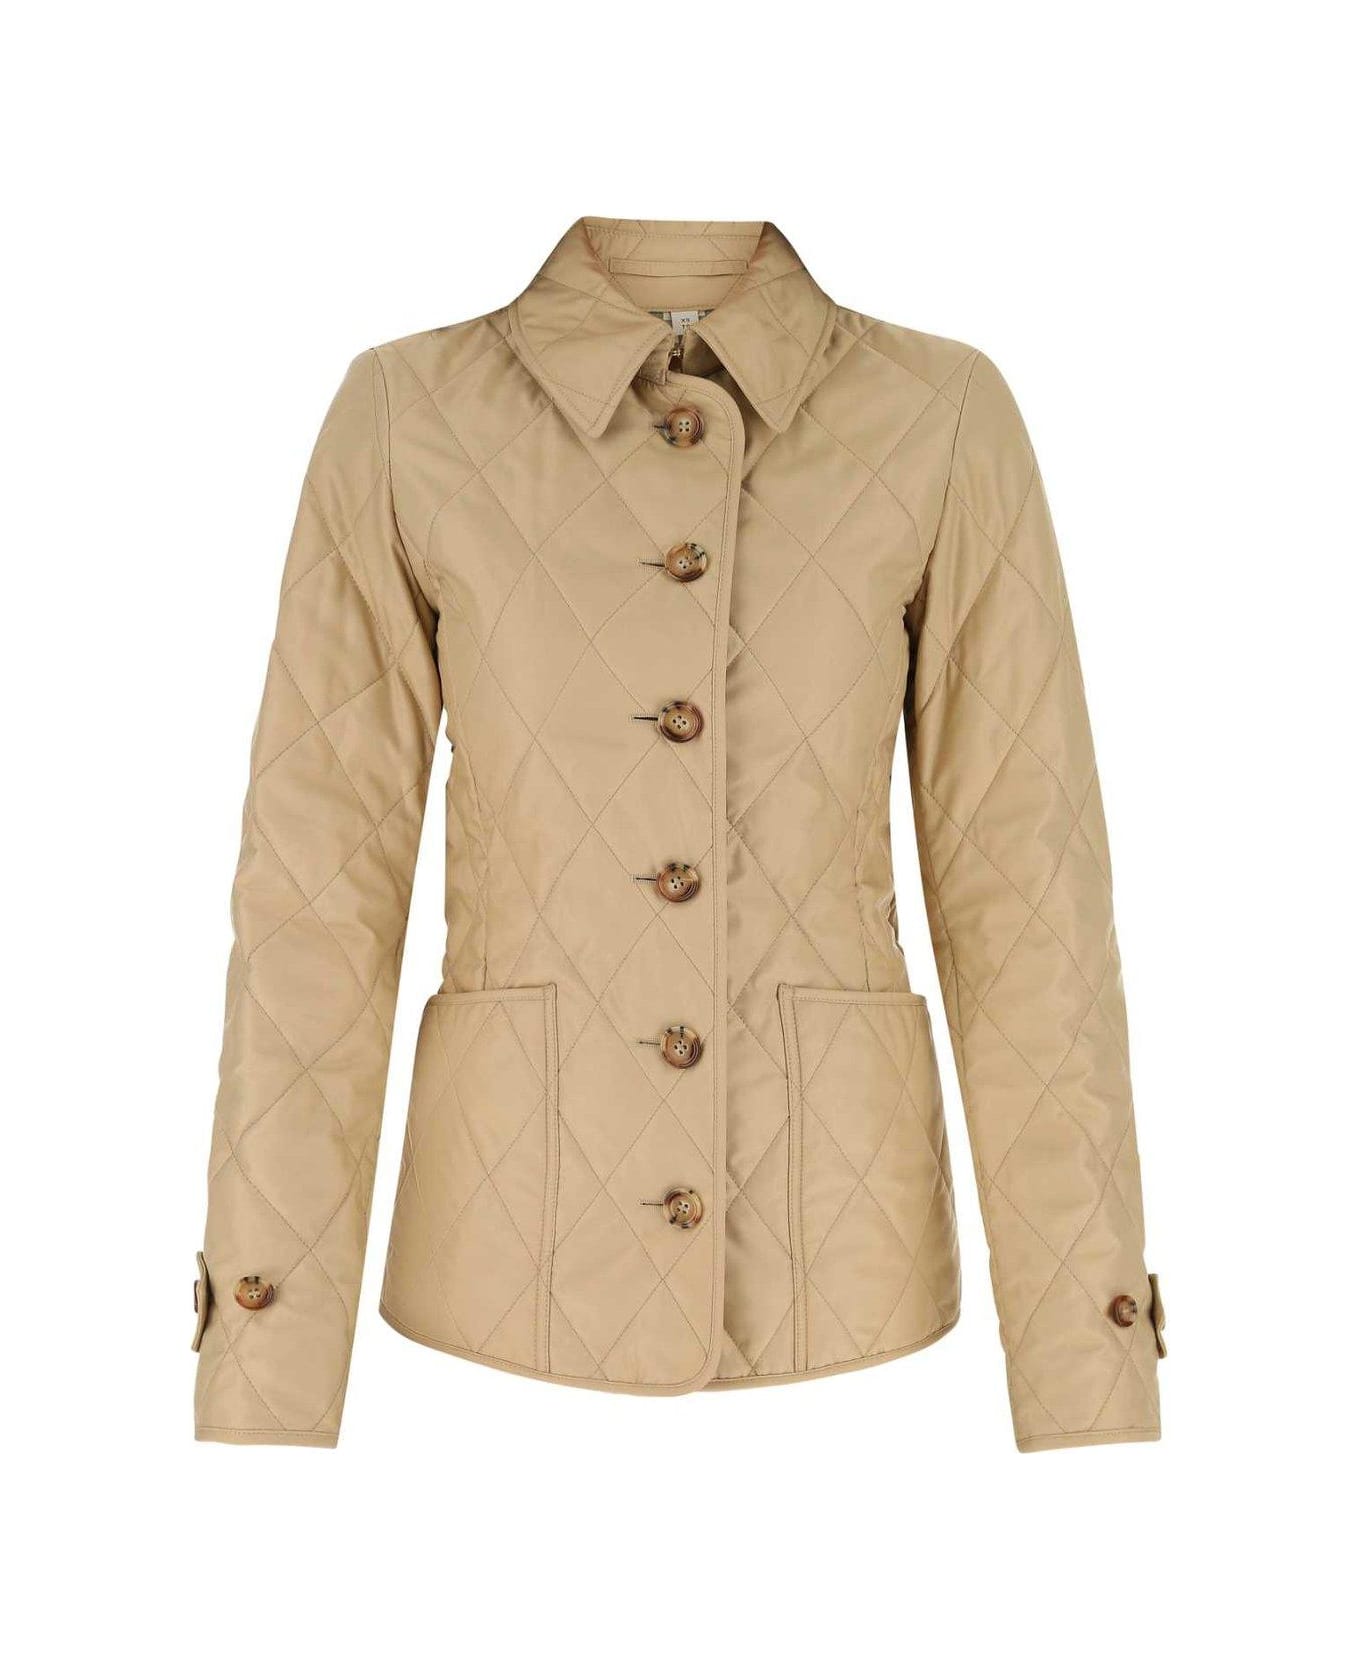 Burberry Quilted Thermoregulated Jacket - NEUTRALS